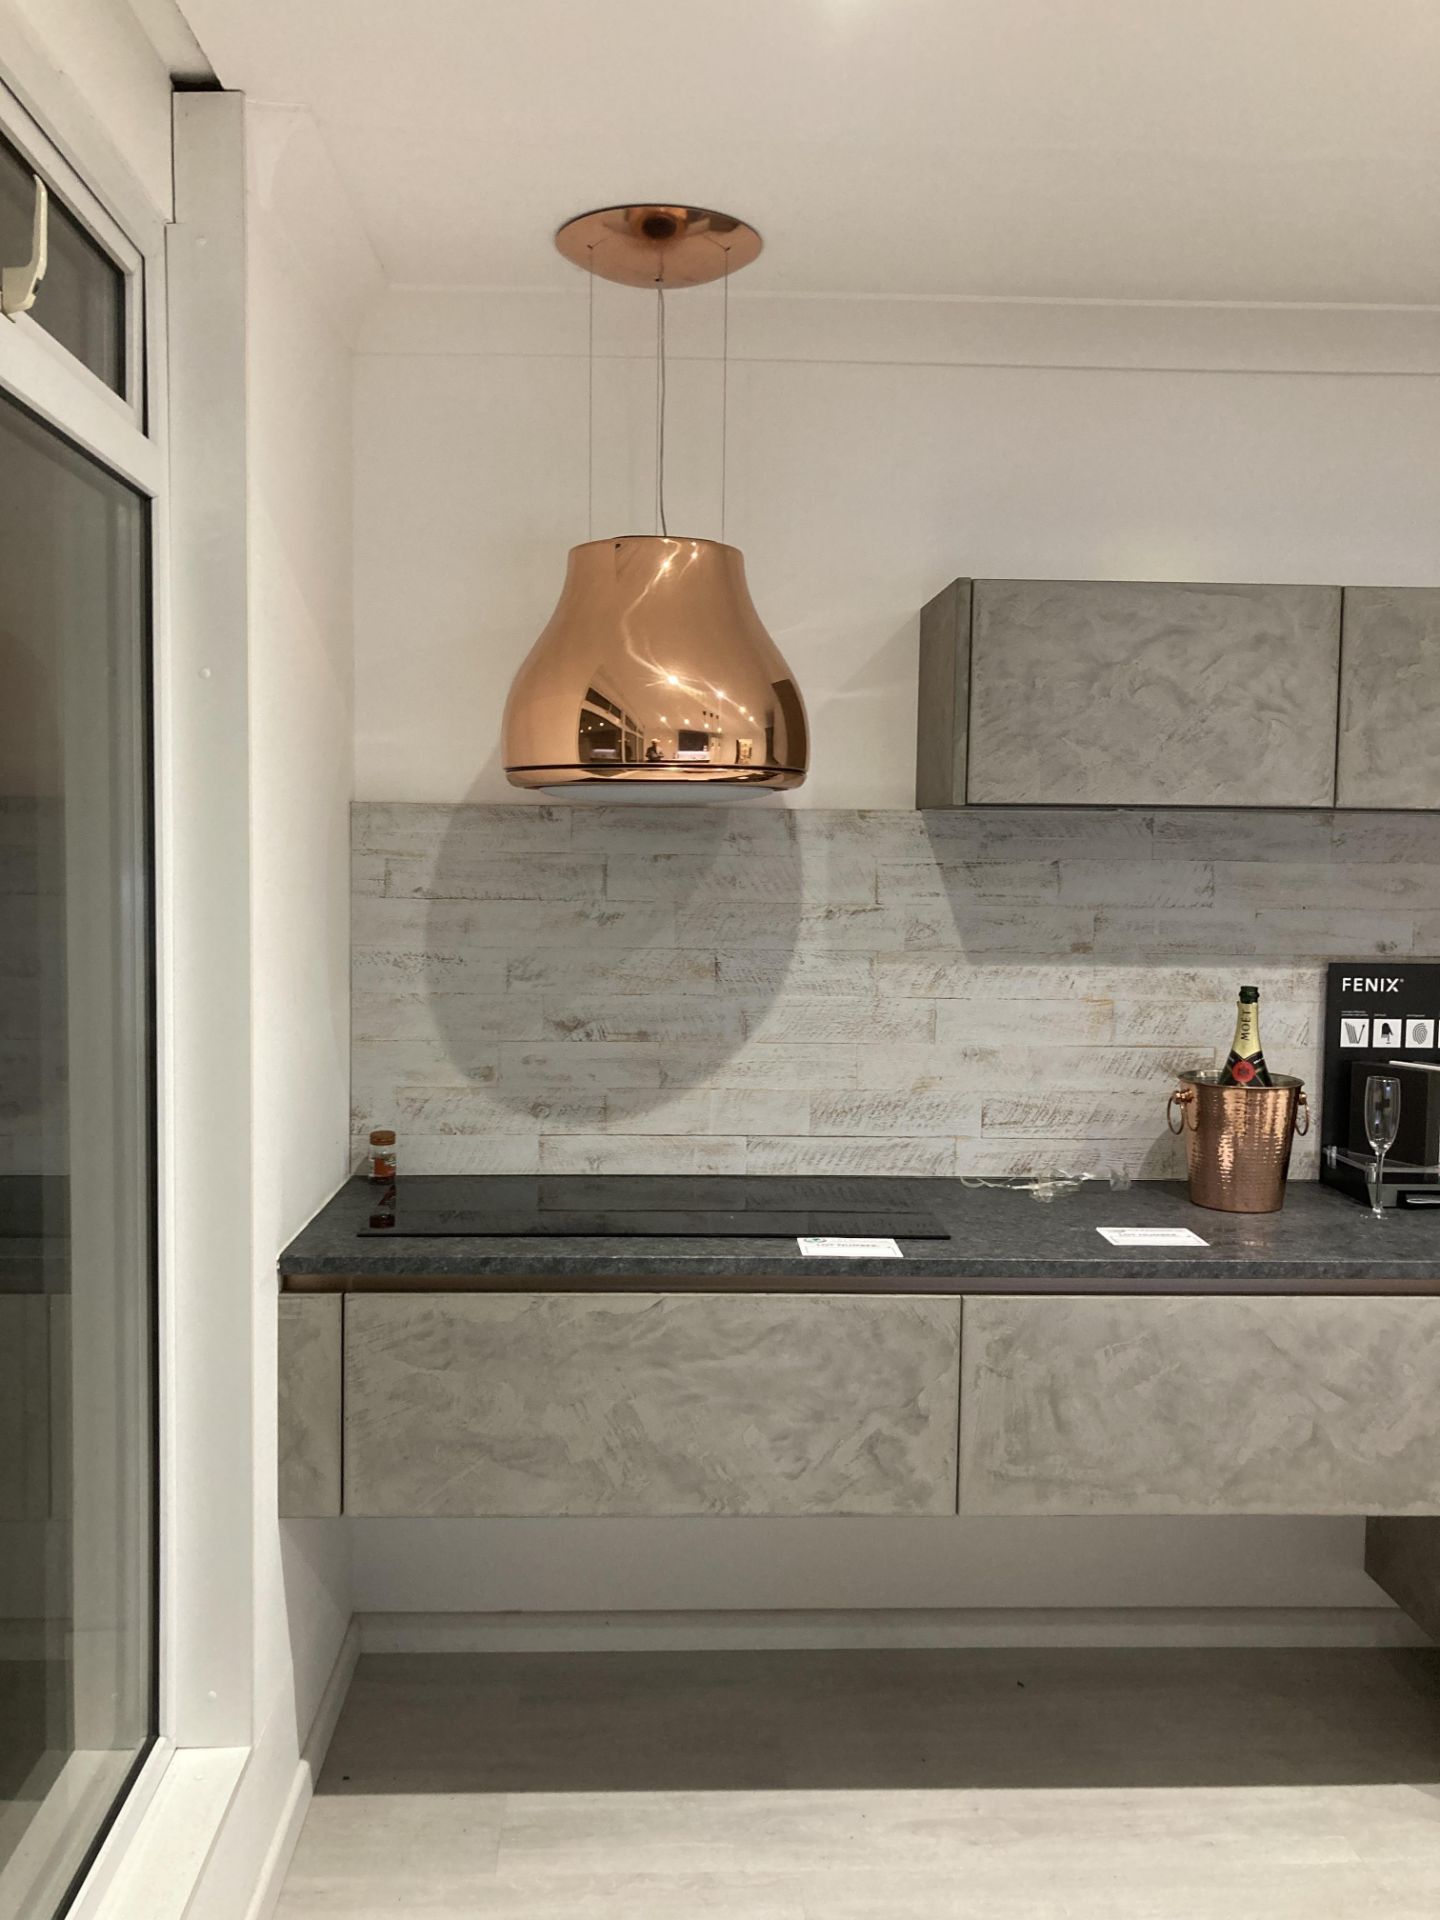 Concrete and graphite open section kitchen display with appliances - Image 5 of 11